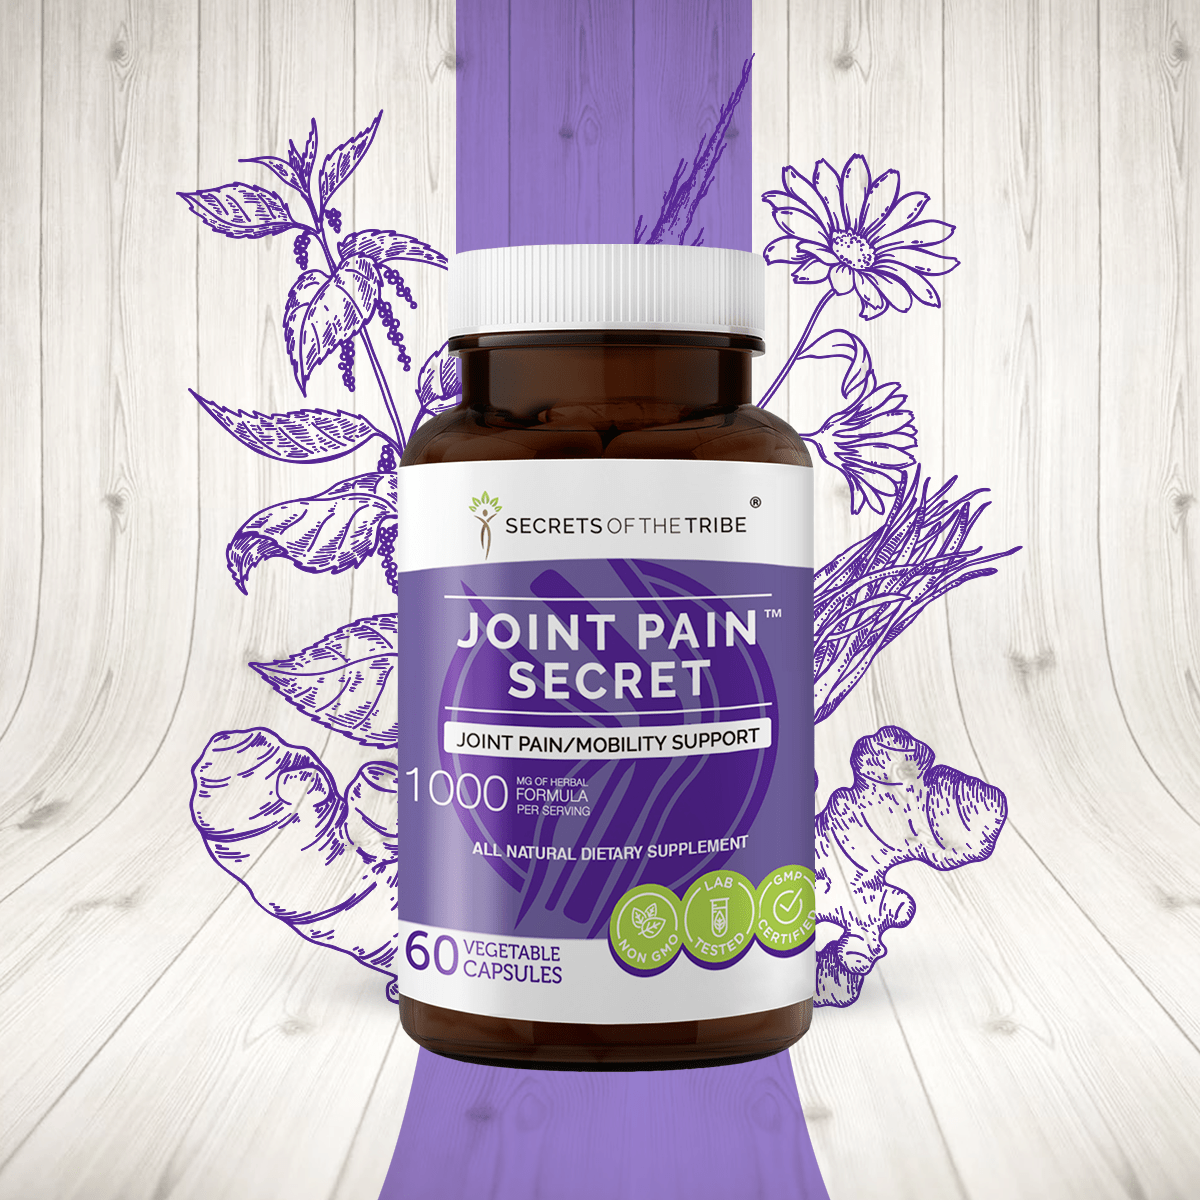 Joint Pain Secret Capsules. Joint Pain/Mobility Support